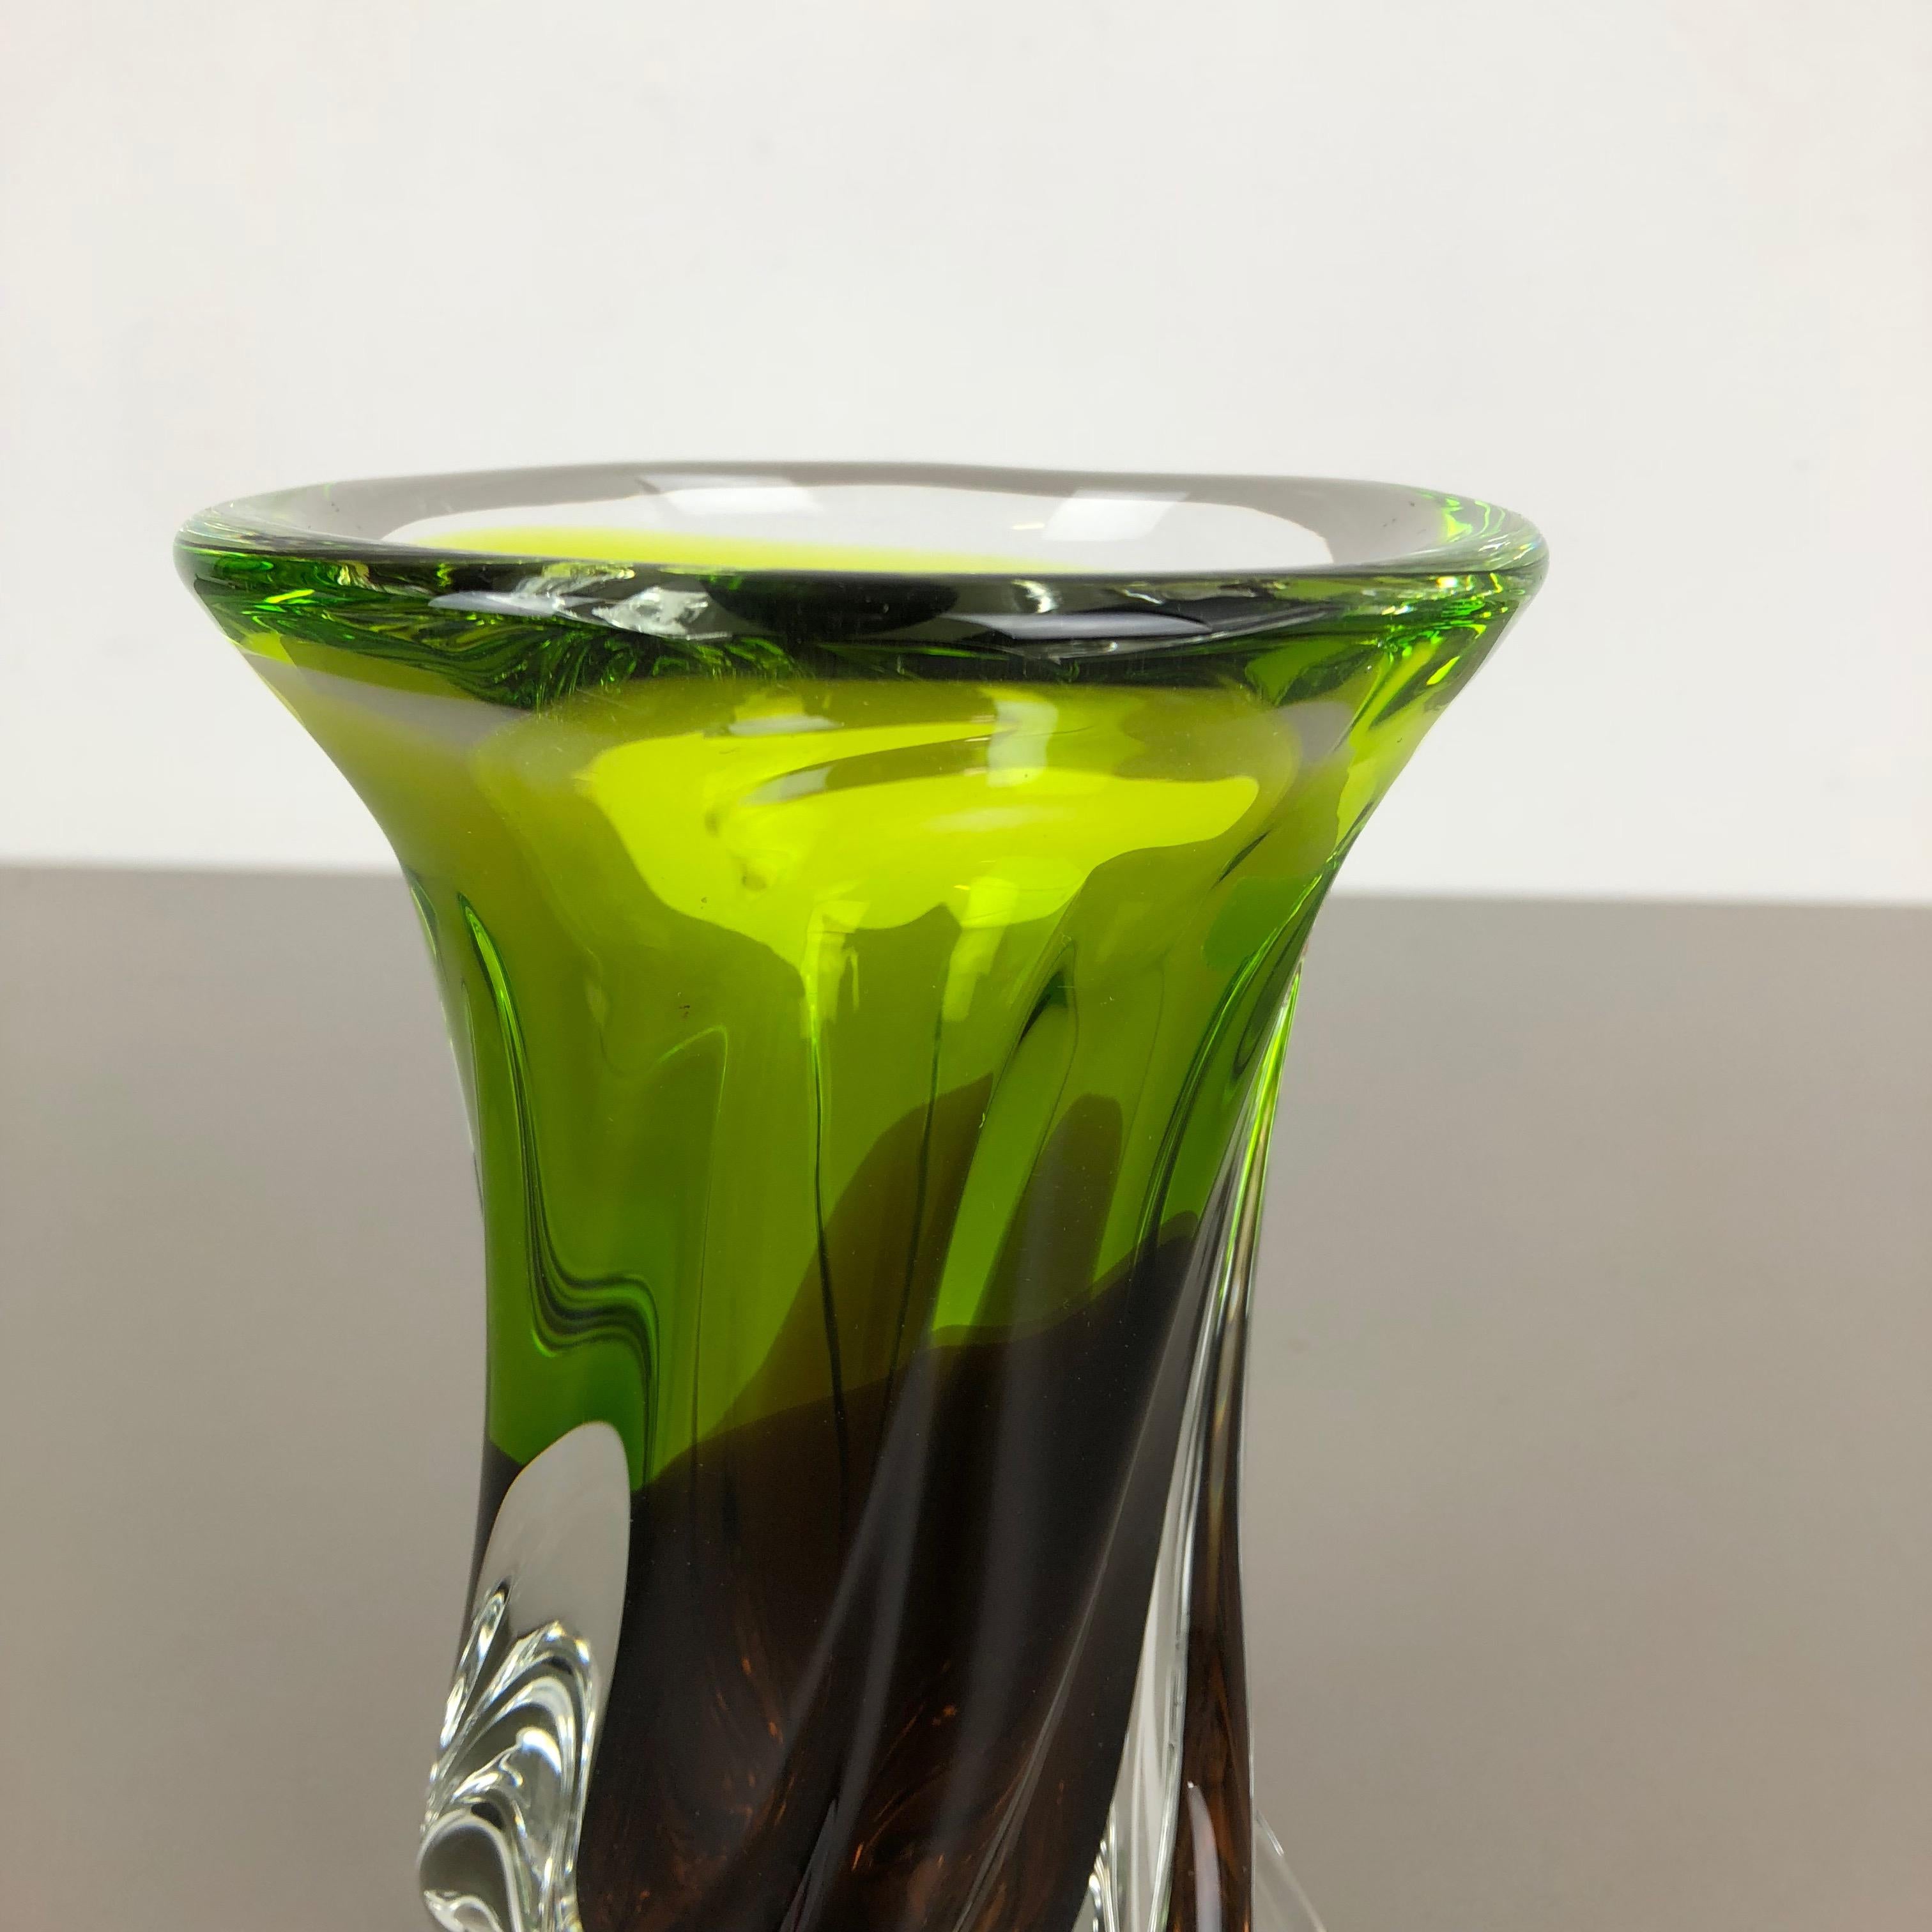 Large Vintage Green Brown Hand Blown Crystal Glass Vase by Joska, Germany, 1970s For Sale 5